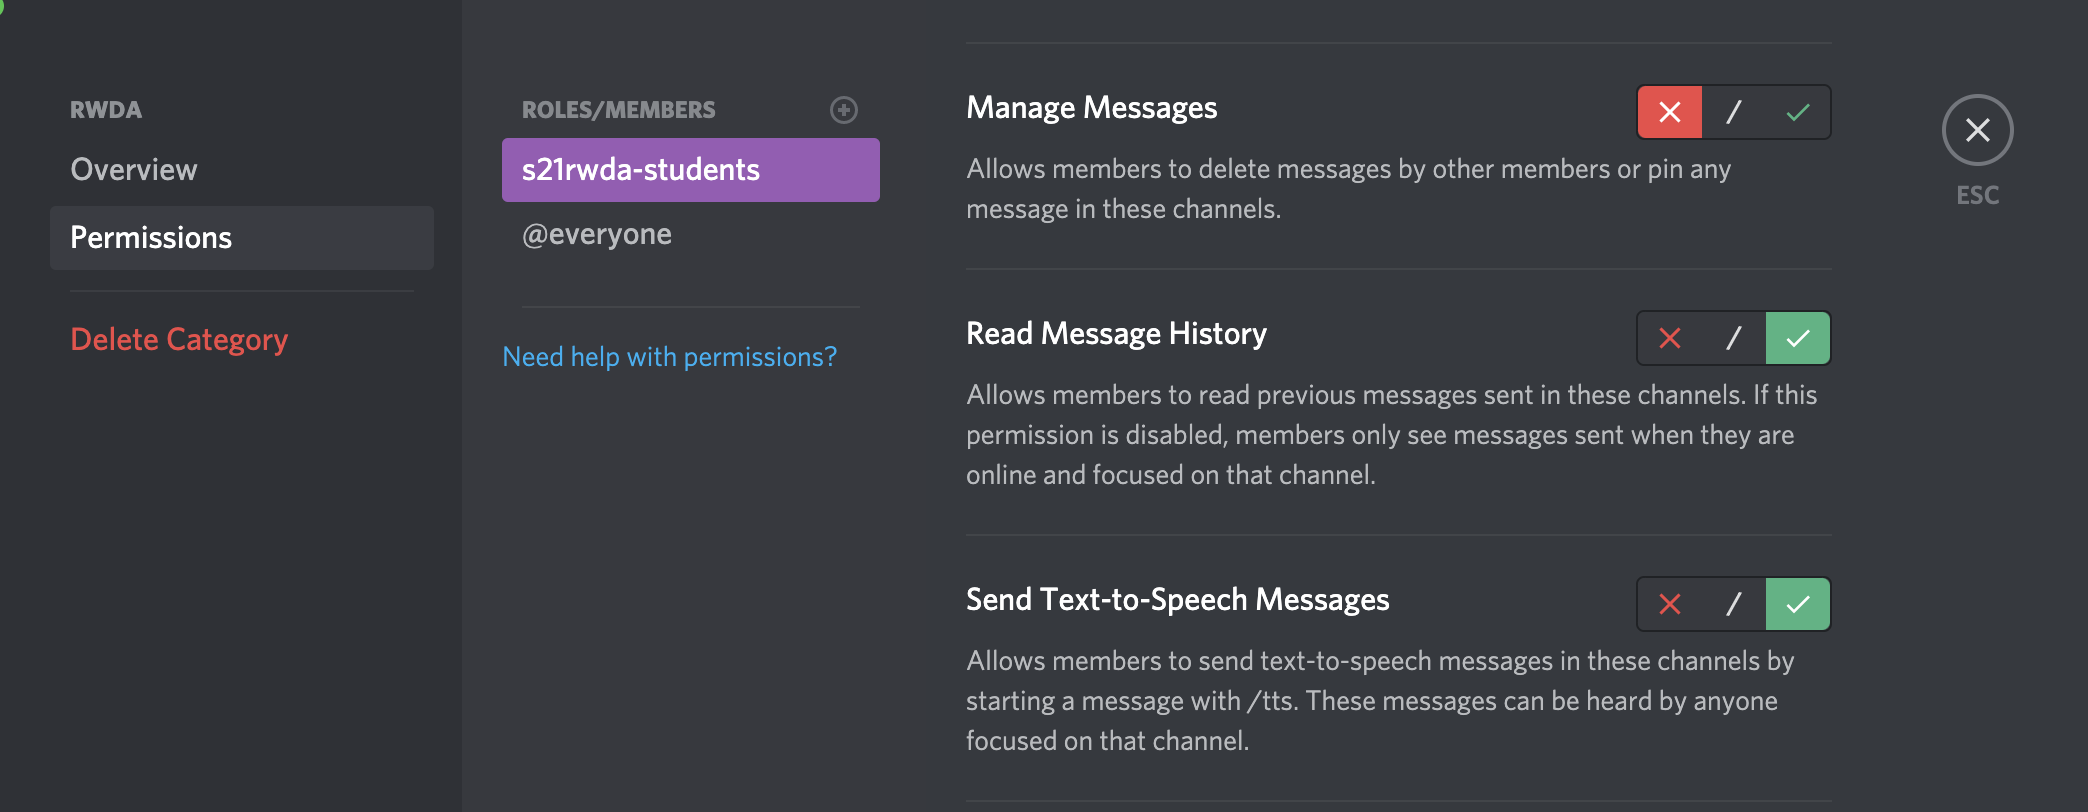 Image showing the read message history permission setting